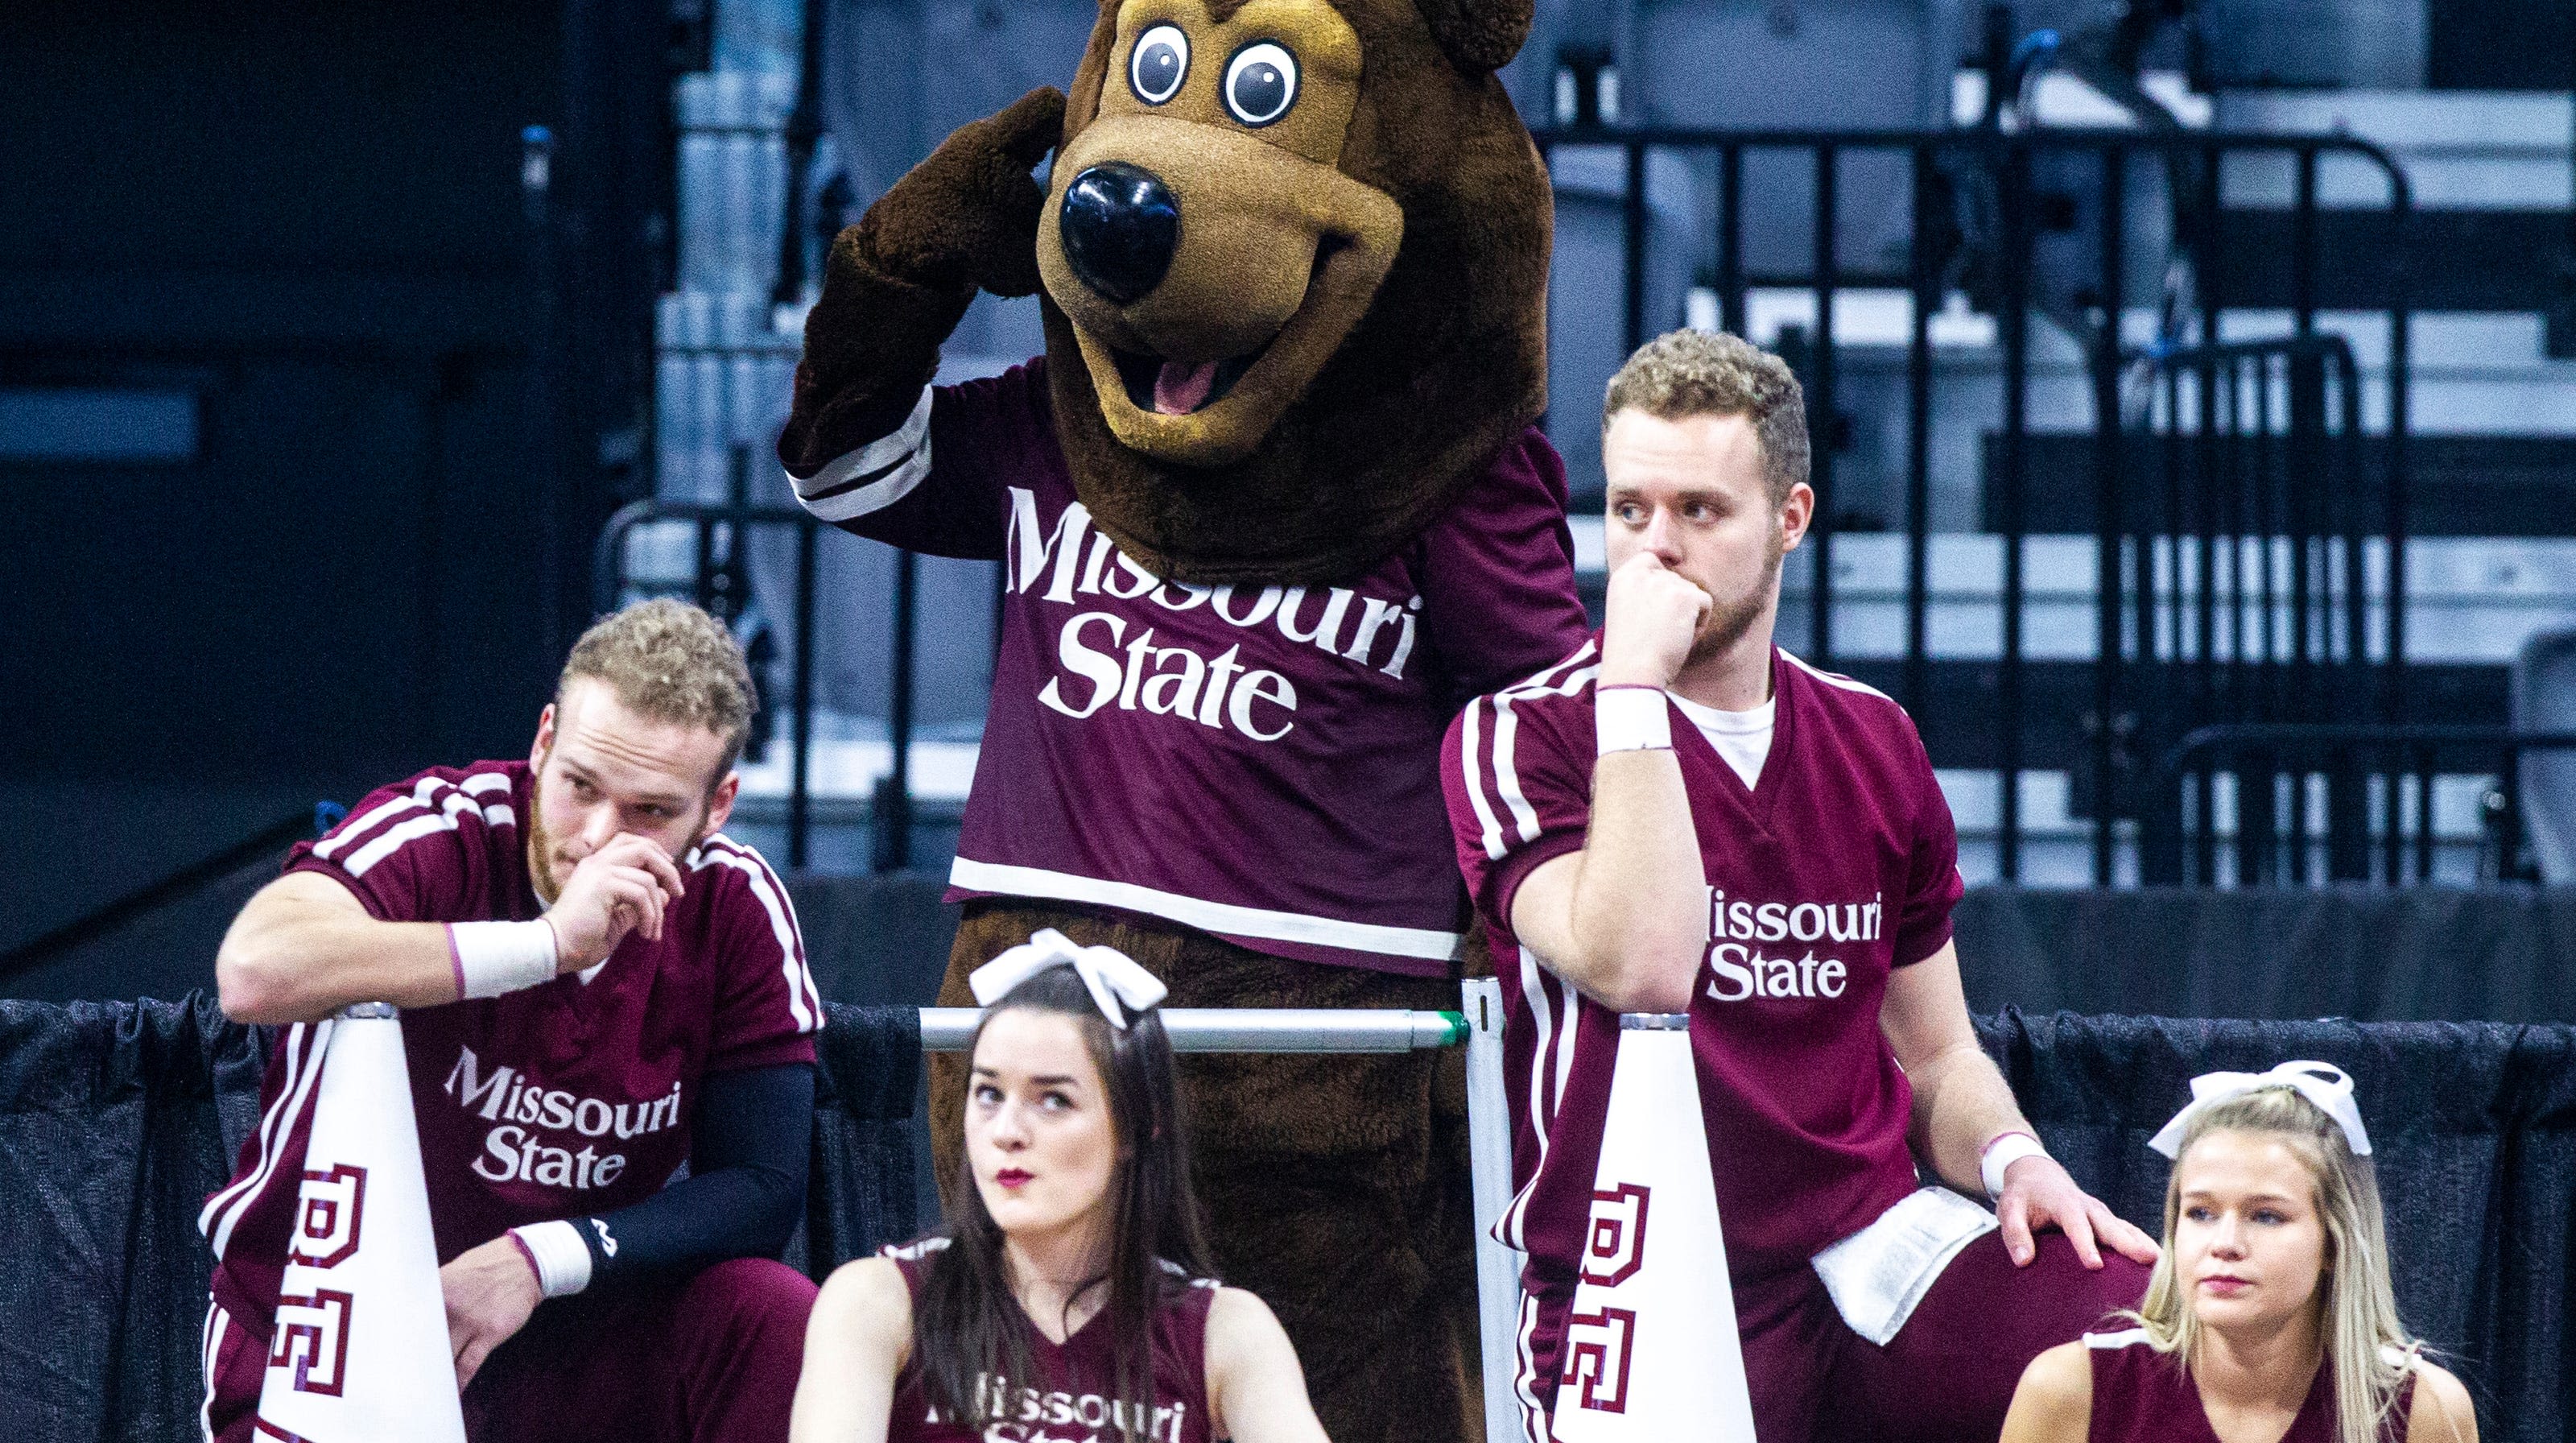 Missouri State will leave Missouri Valley Conference for Conference USA